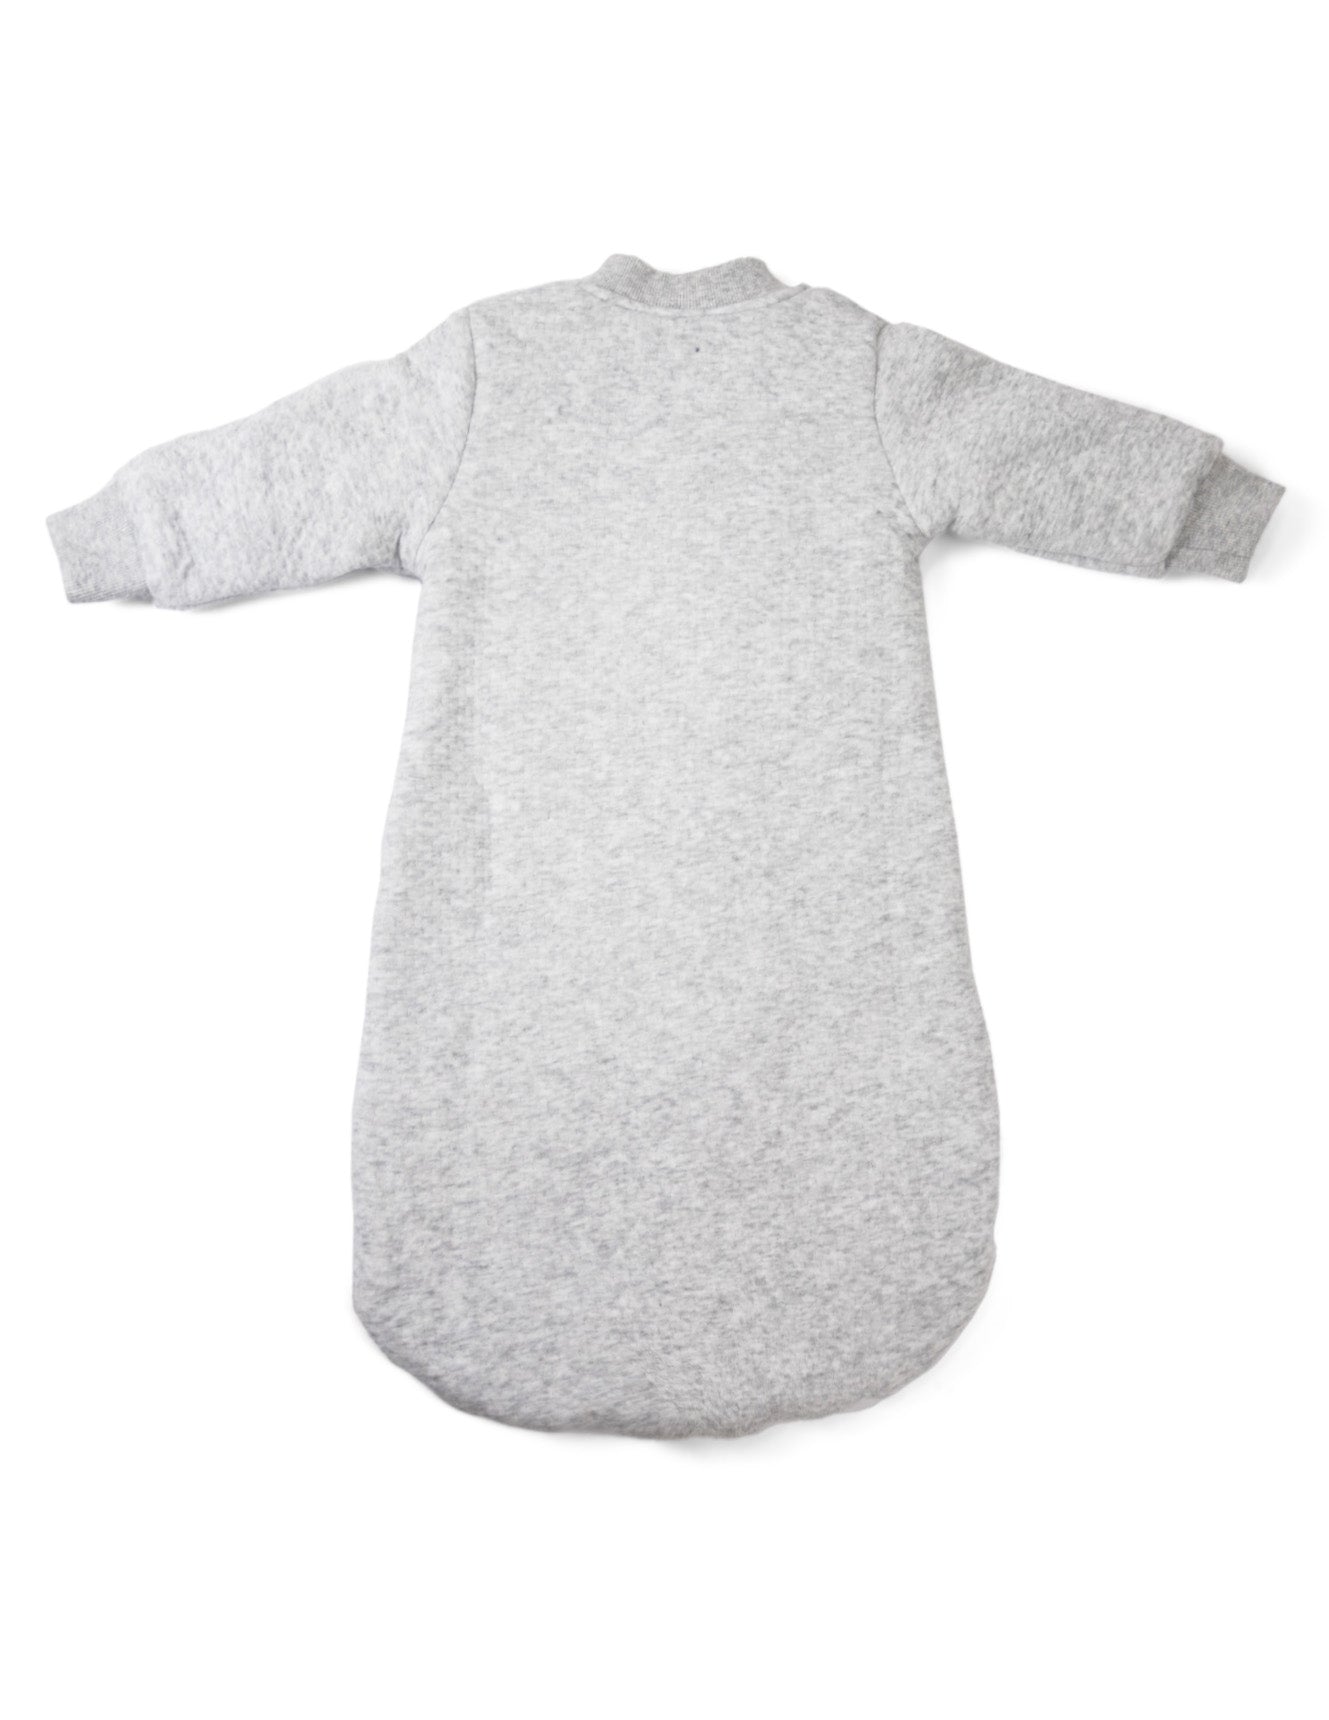 sleeping bag cotton with arms 3.0 TOG - grey marle/grey lines